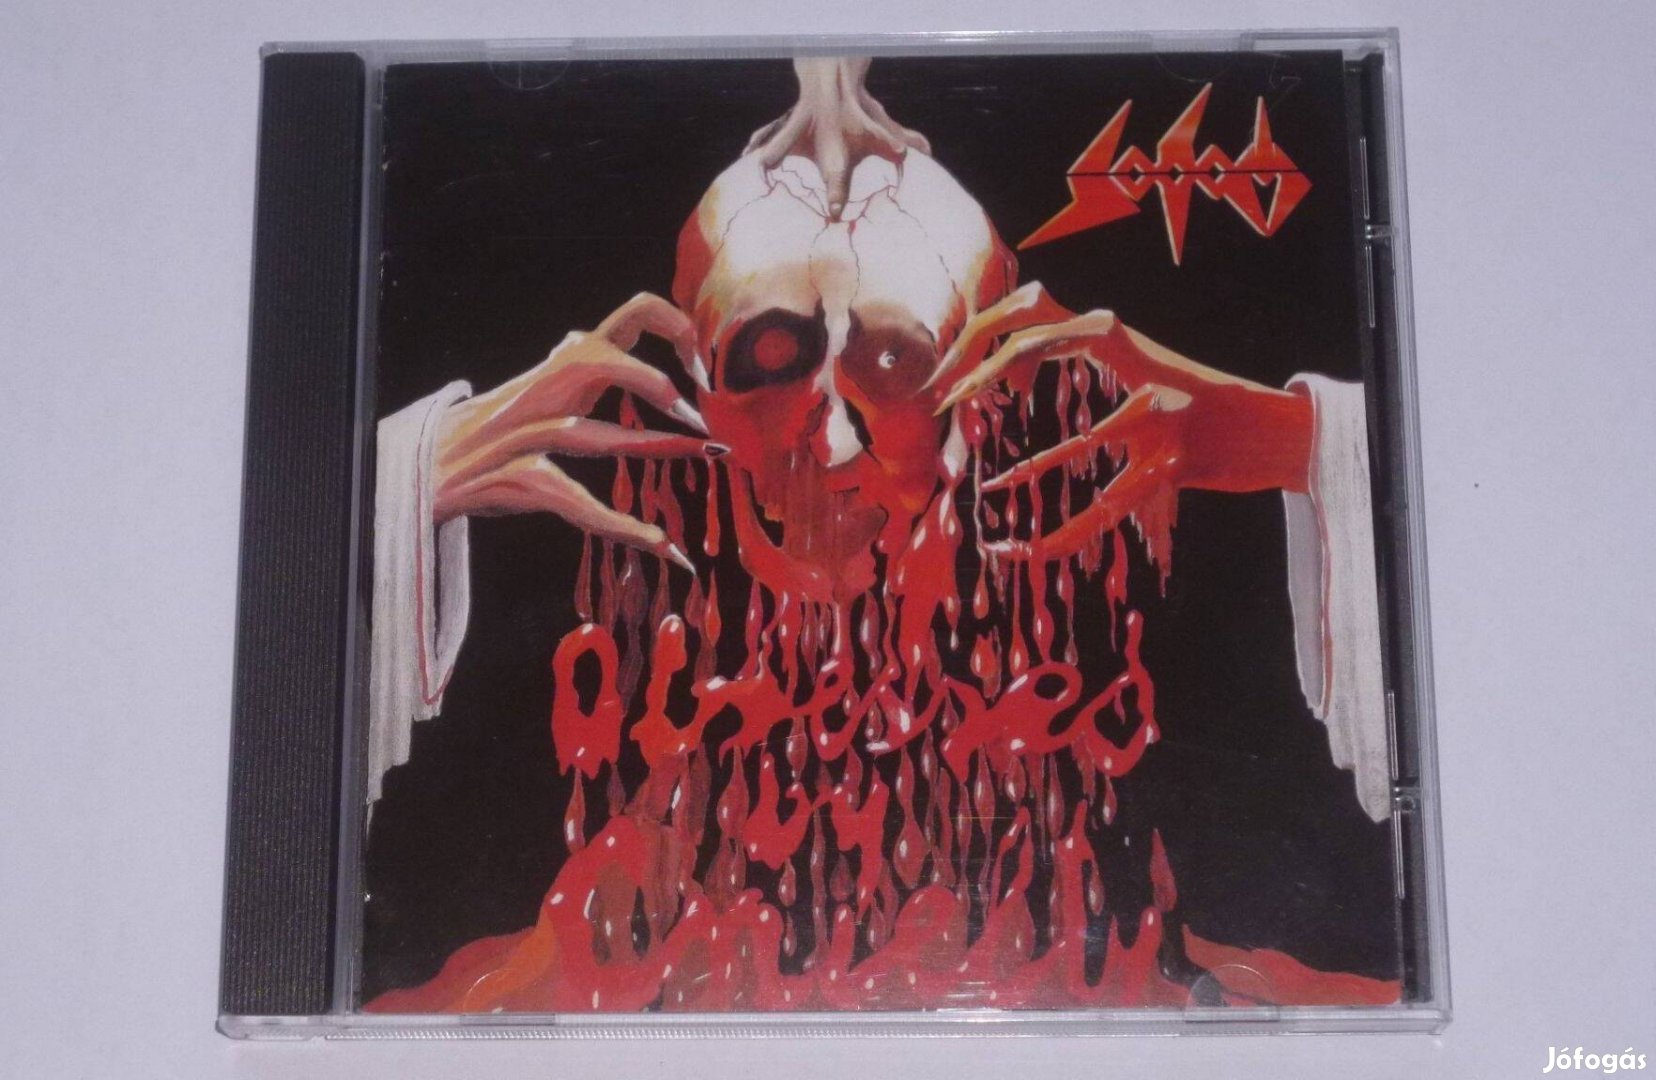 Sodom - Obsessed By Cruelty CD